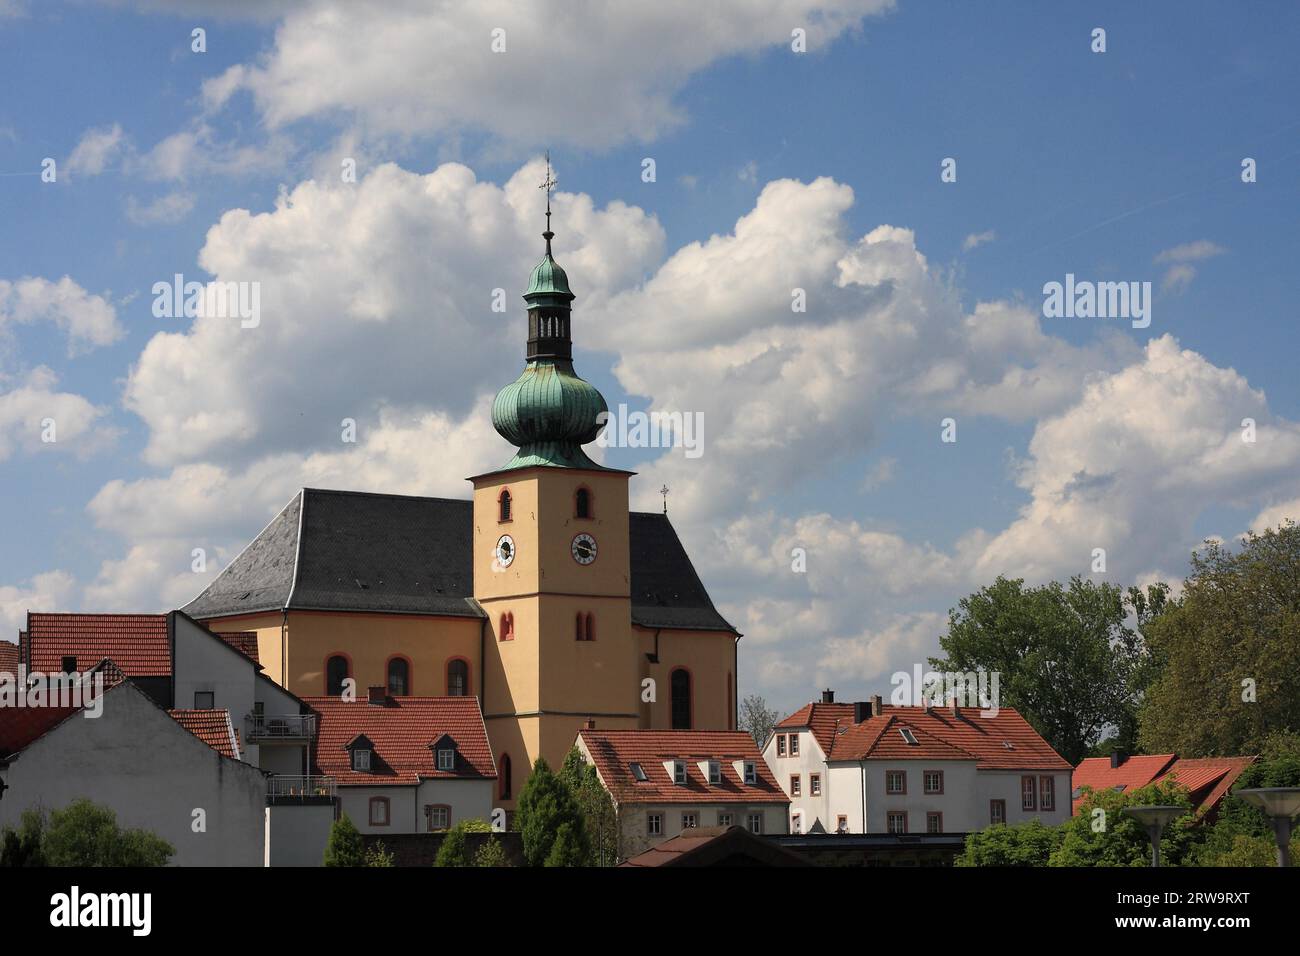 View of the Saarland baroque church of St. Stephan in Illingen, residential houses in the foreground, blue-white sky in the background Stock Photo